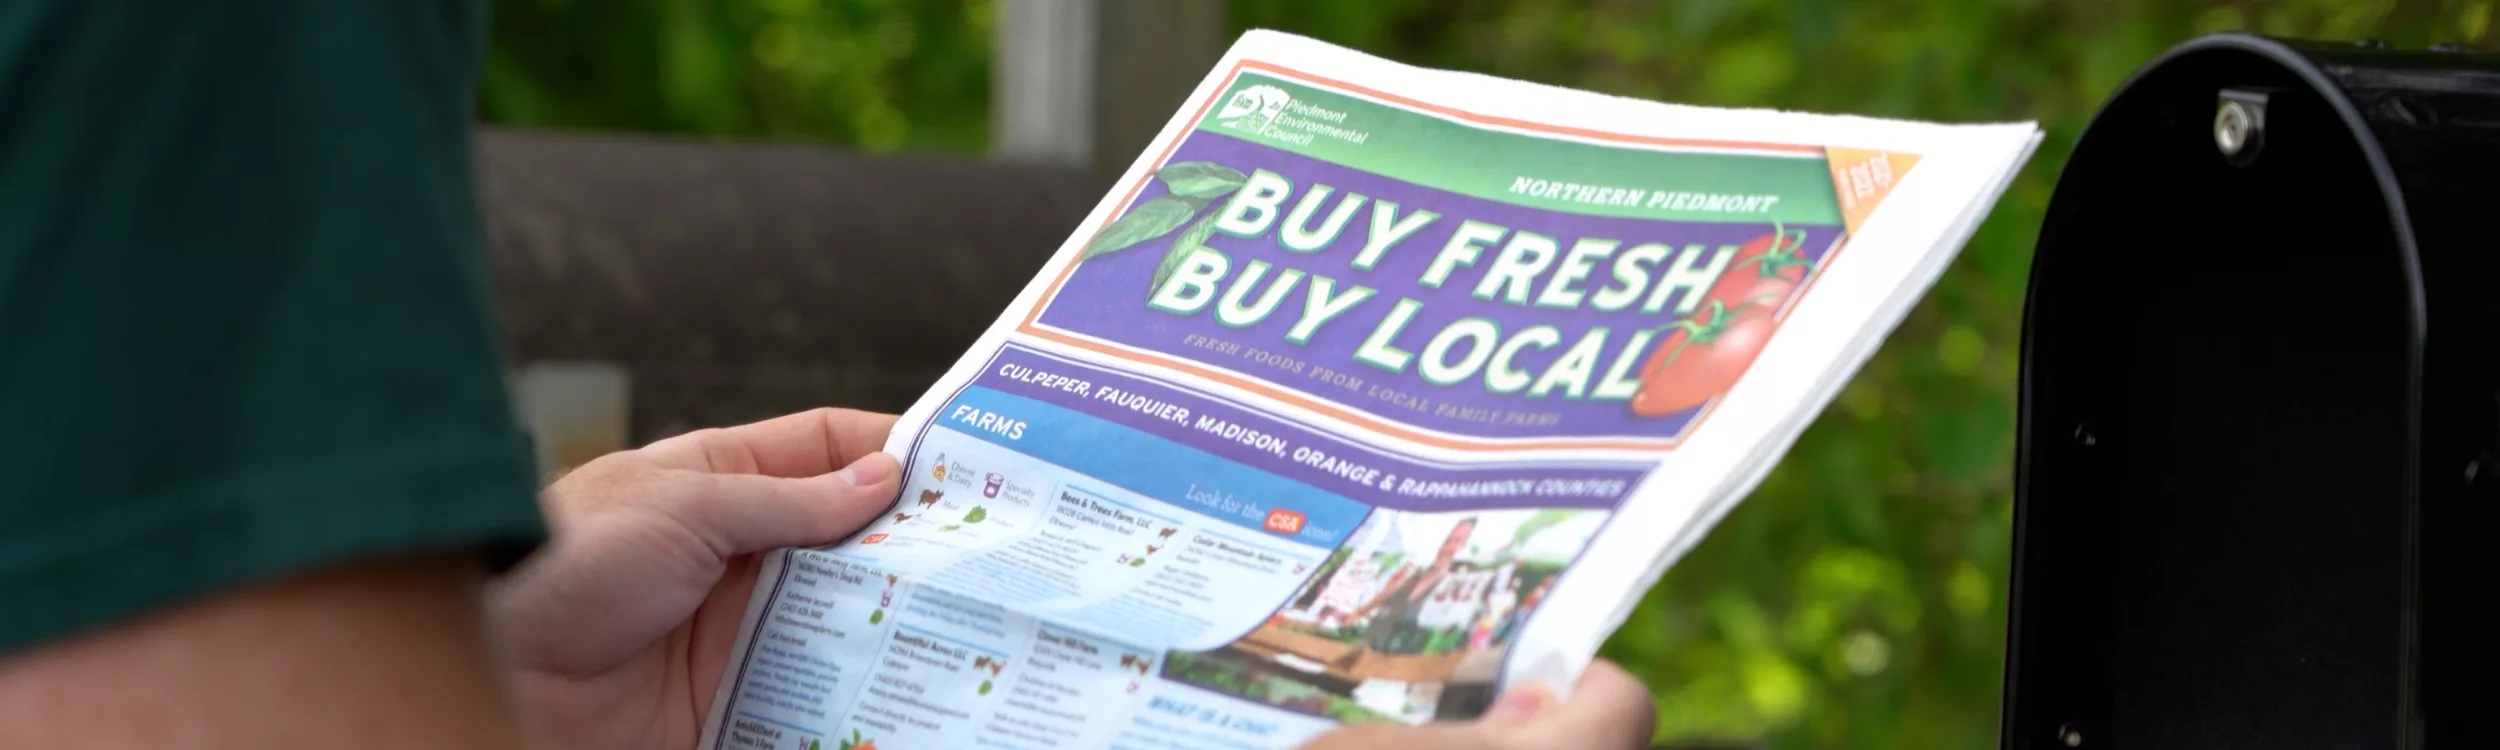 Buy Fresh Buy Local Guides - The Piedmont Environmental Council